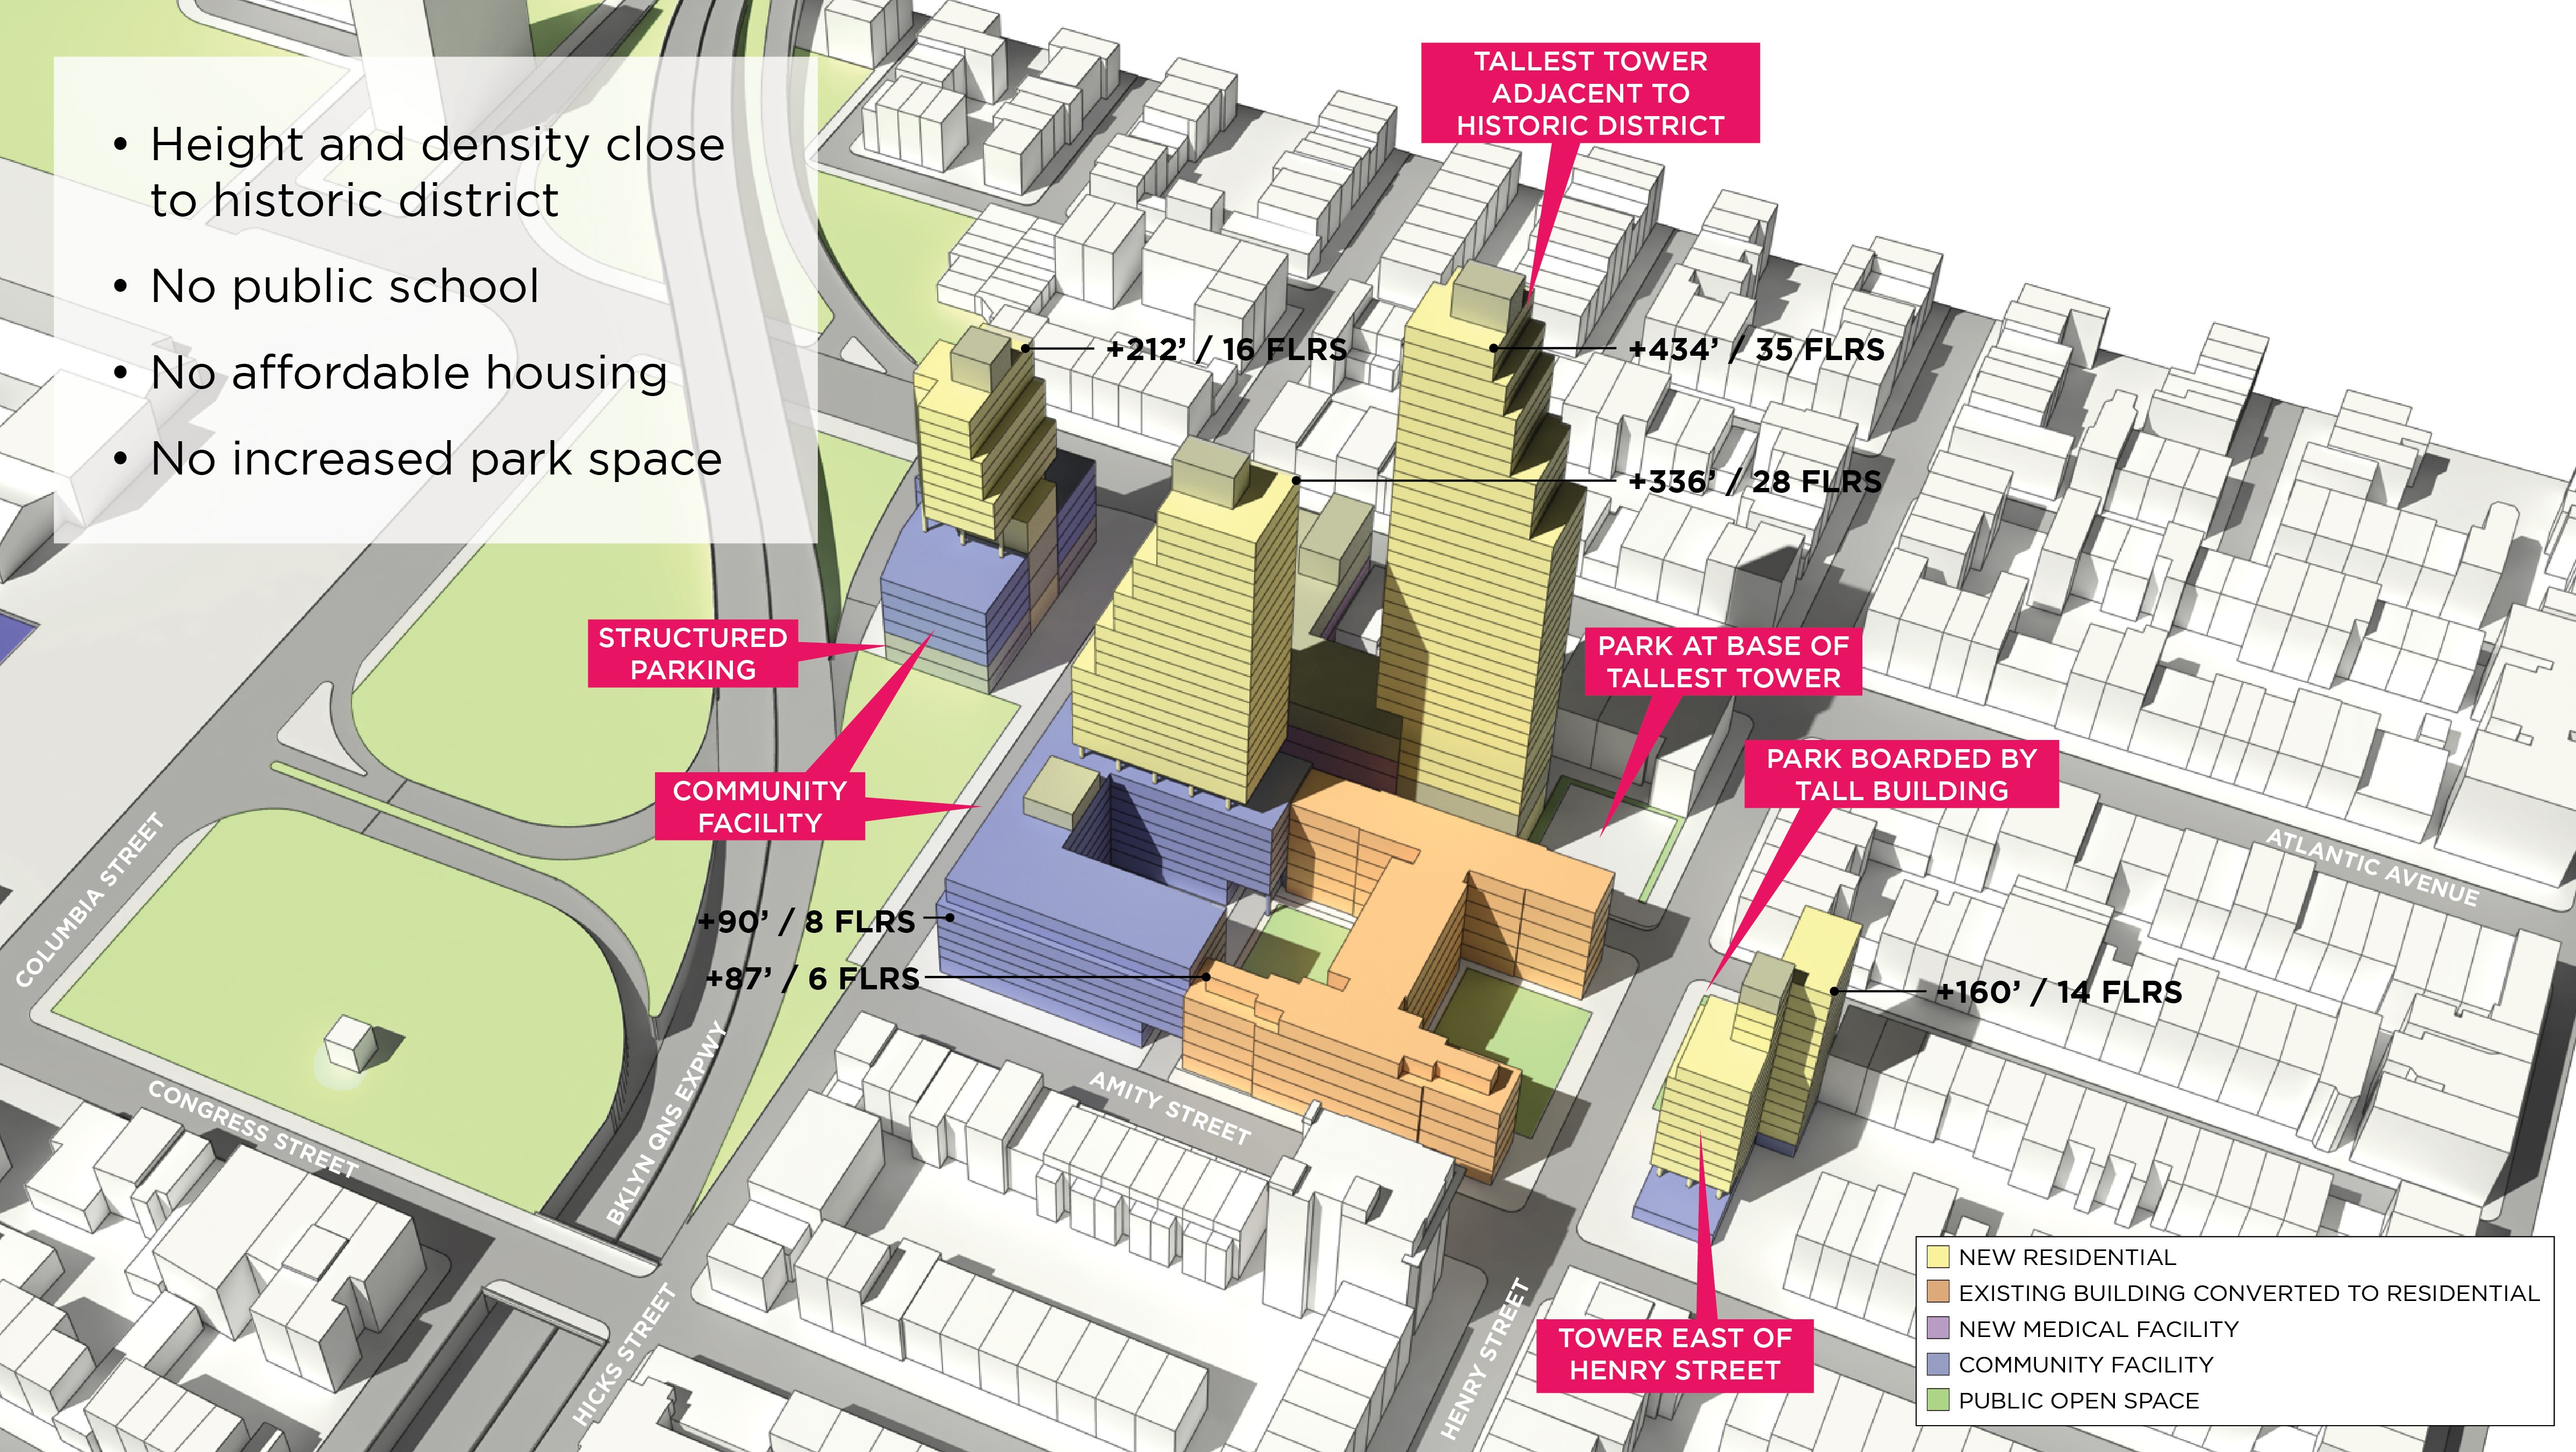 A graphic summary of the new LICH As-of-Right plan, which could include housing for up to 800 students.